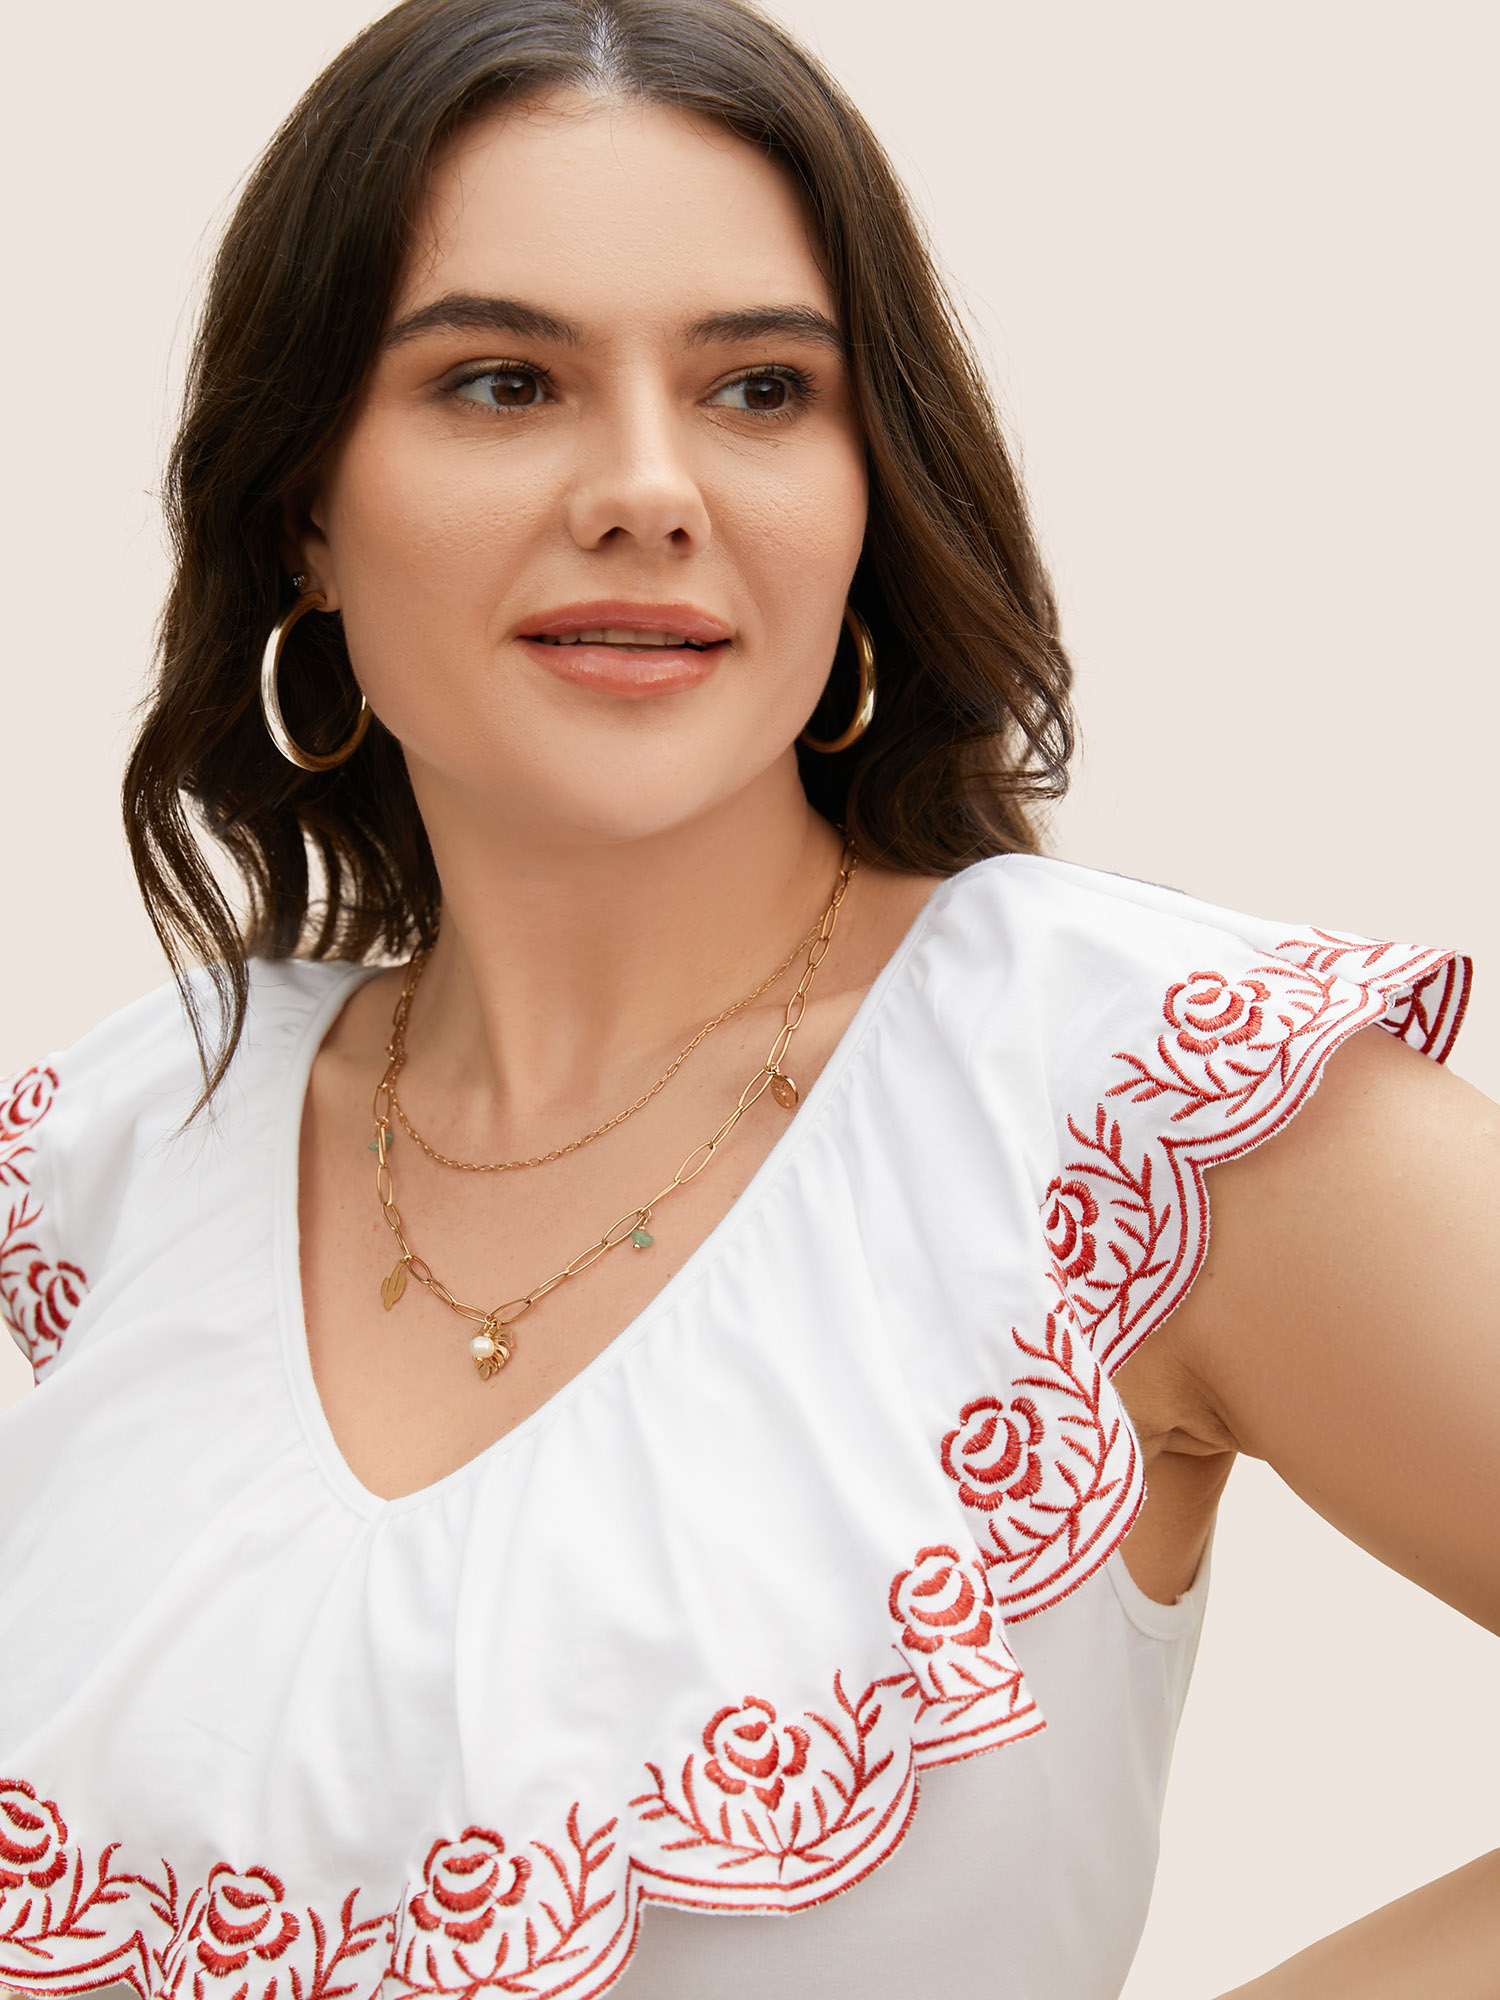 

Plus Size Bandana Floral Embroidered Ruffle Trim Tank Top Women Originalwhite Resort Contrast V-neck Vacation Tank Tops Camis BloomChic